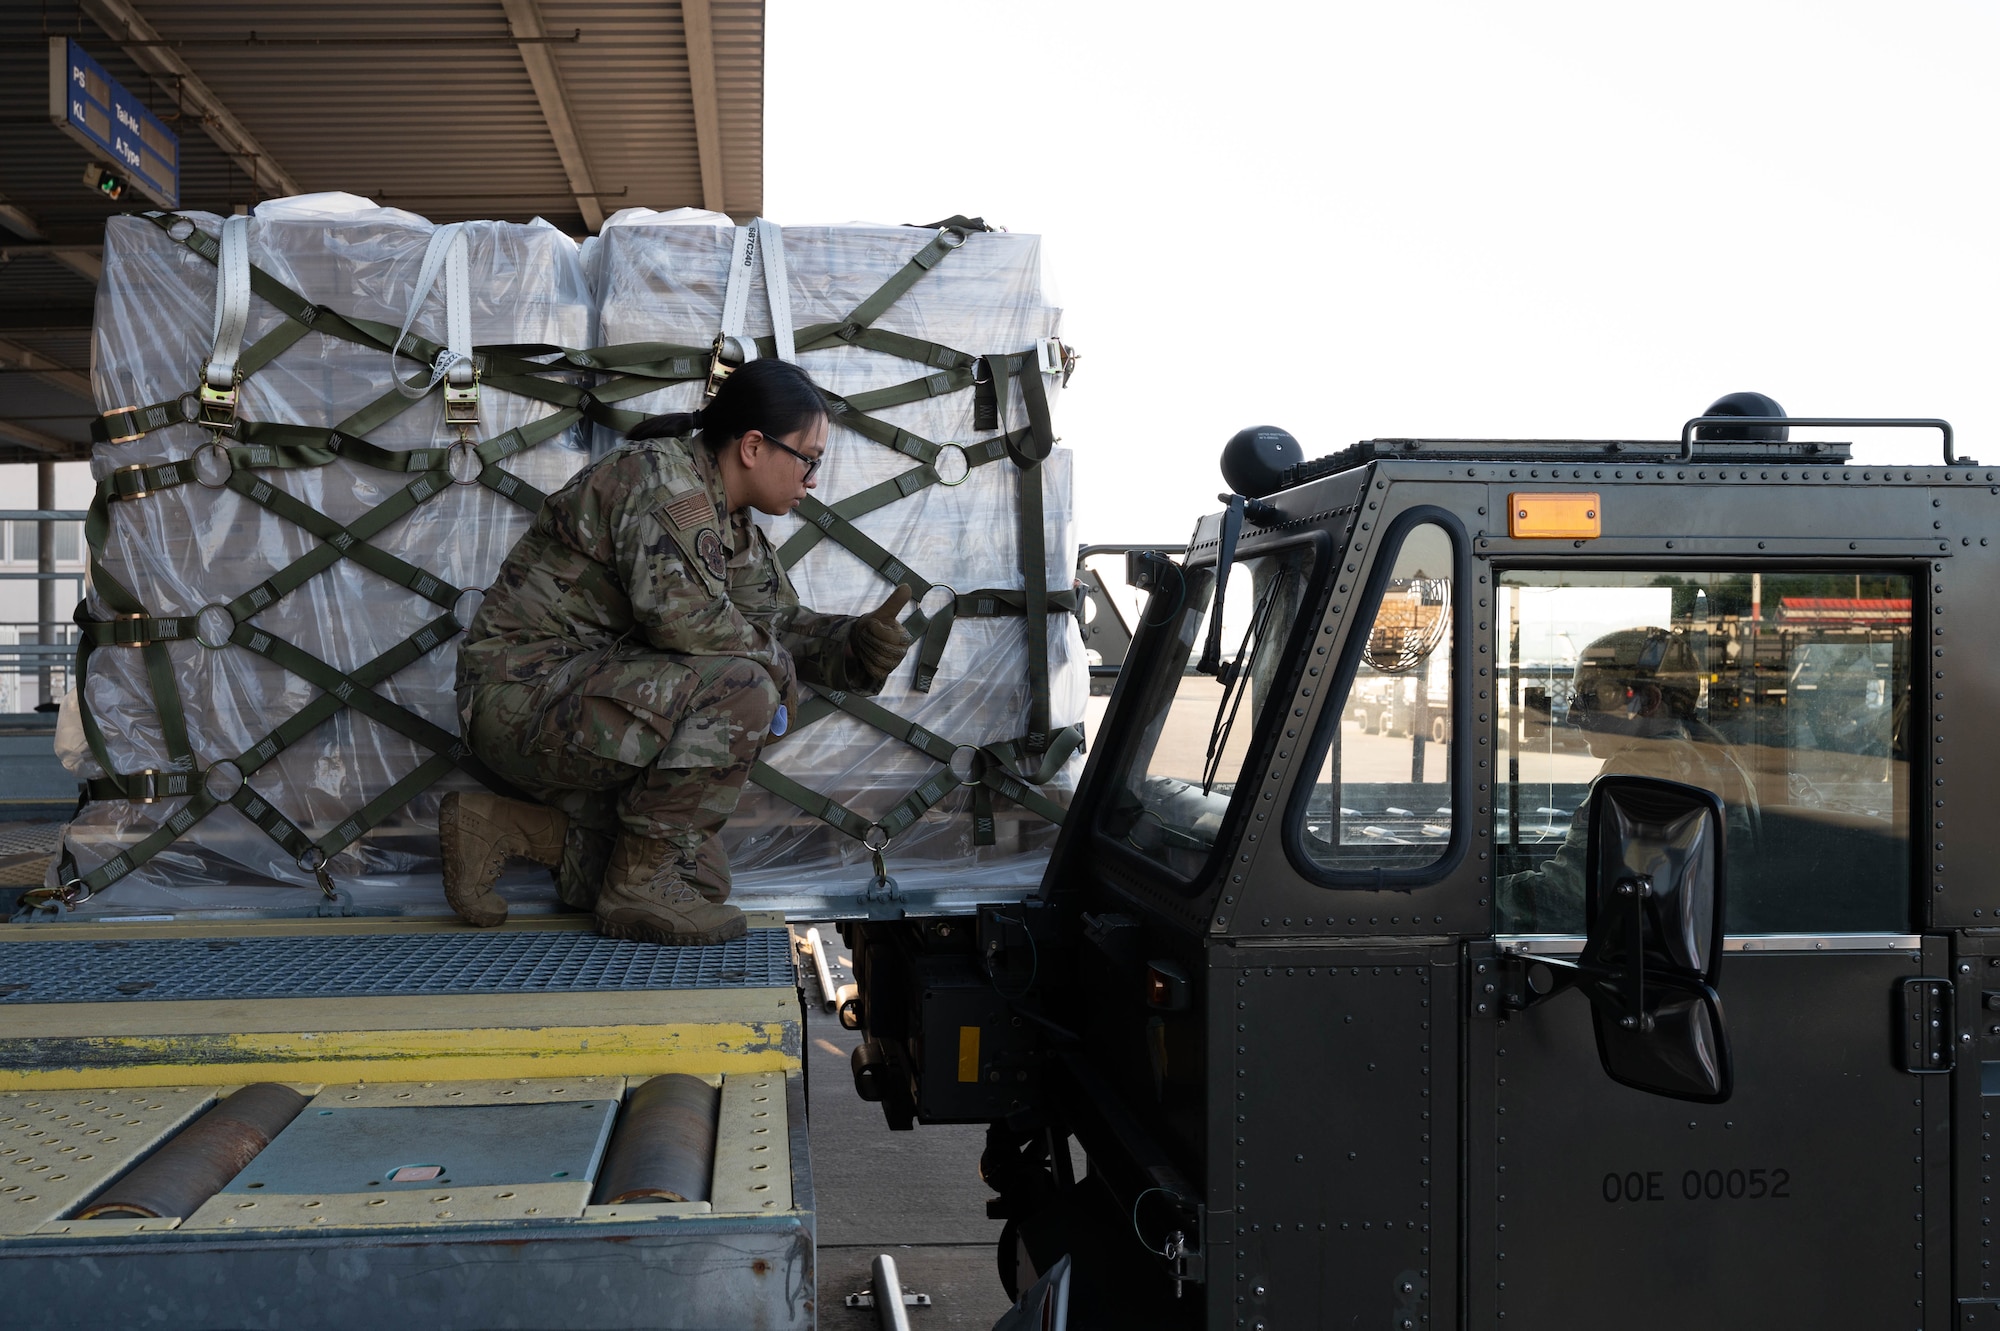 An Airman directs a pallet of infant formula onto a 60K cargo loader driven by another Airman.